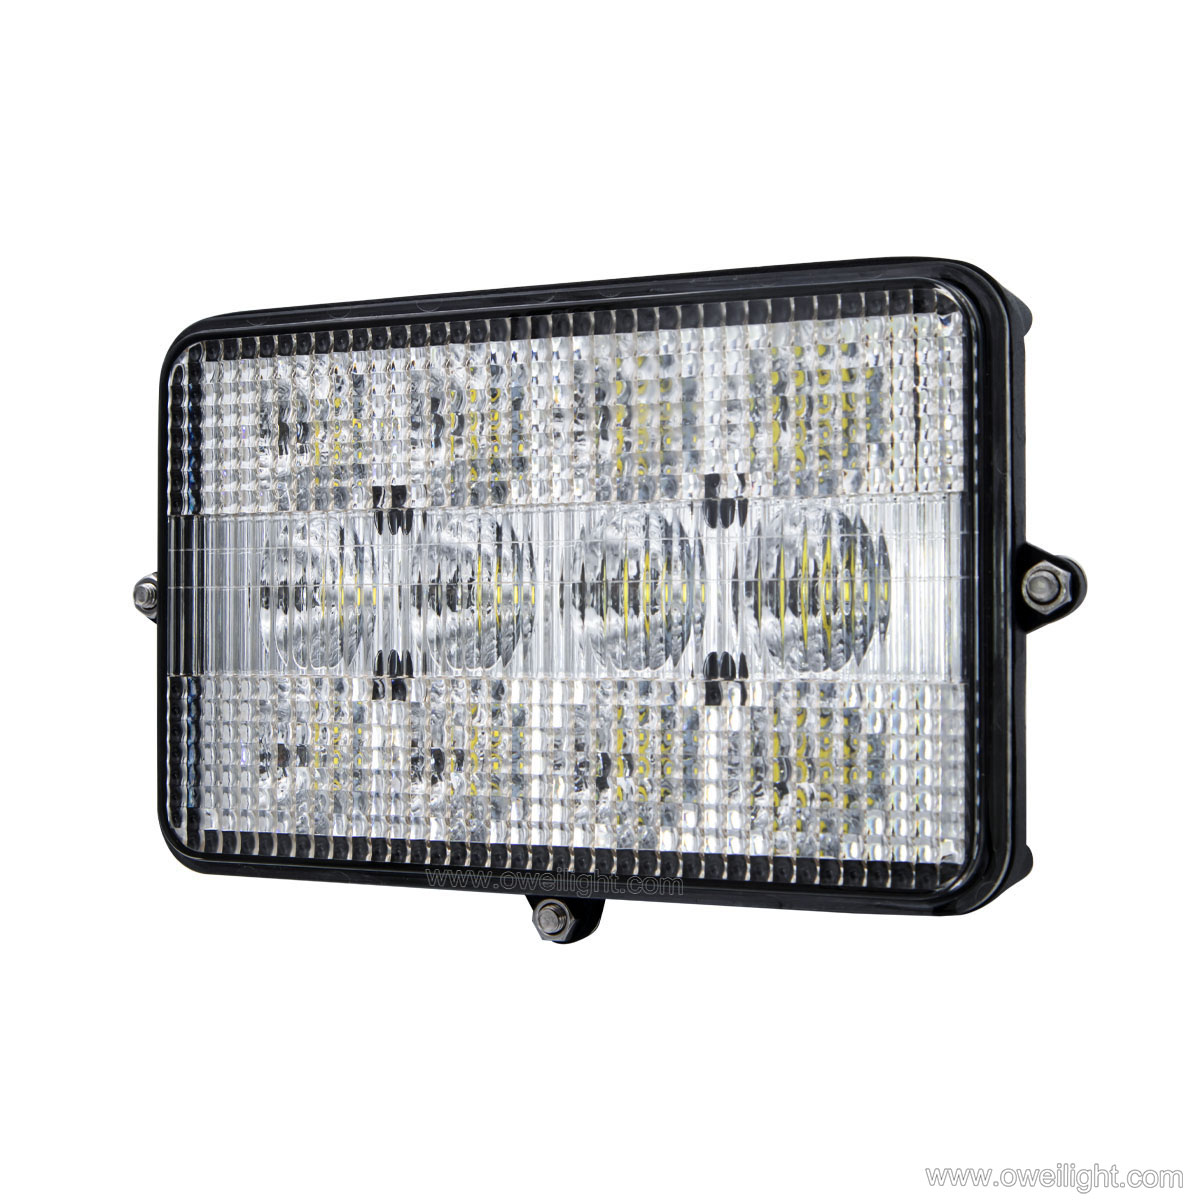 Agricultural Light - OW-5062-60W